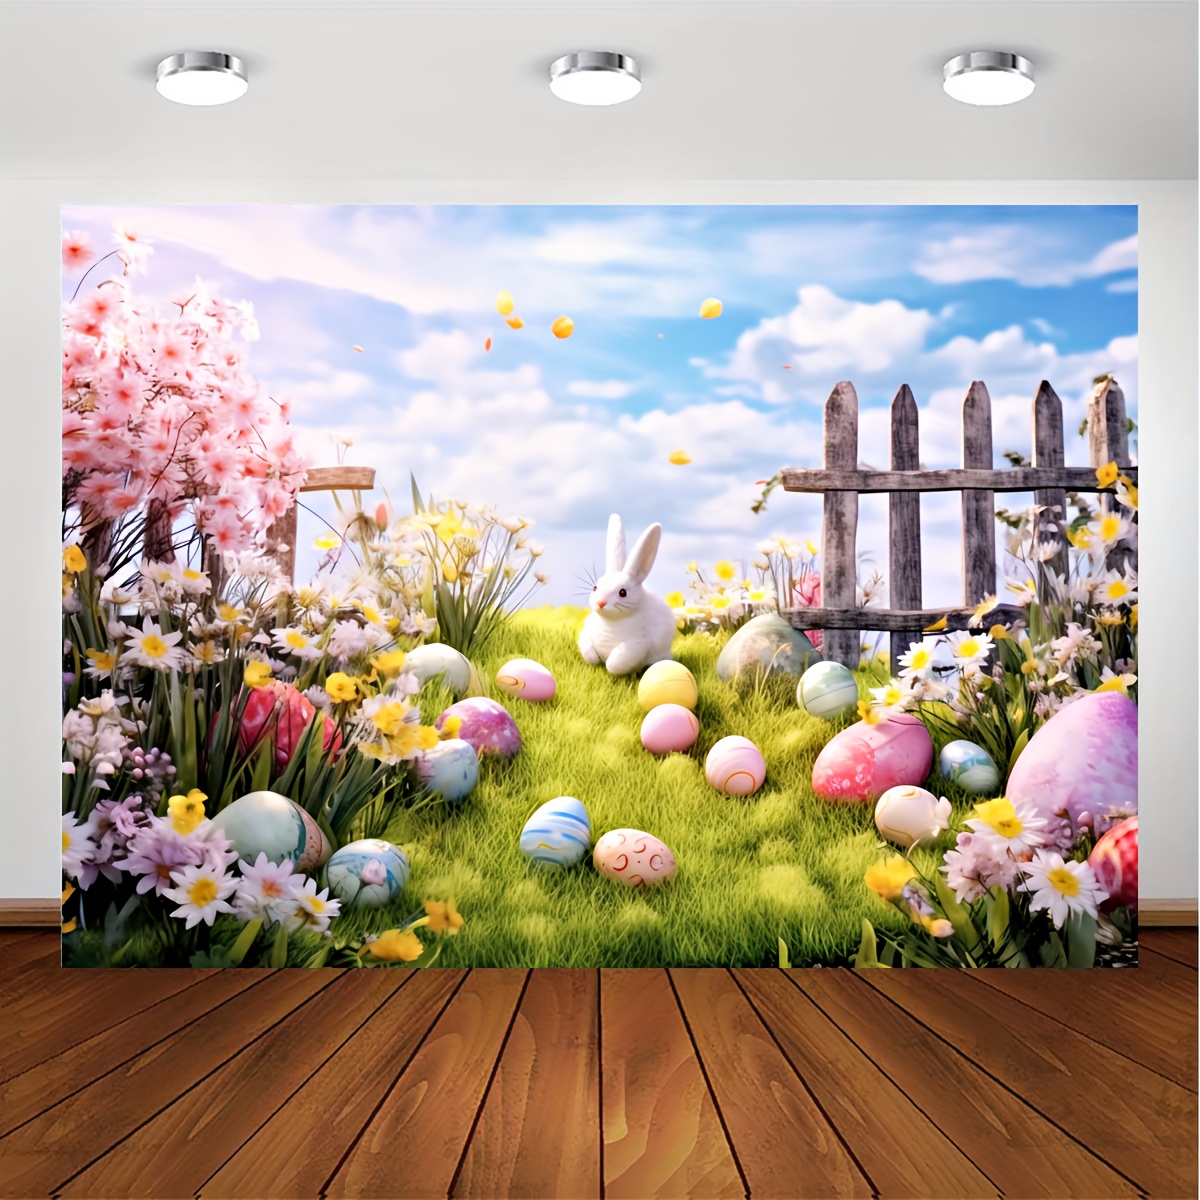 1pc spring easter polyester photography backdrop garden fence flower bunny colorful eggs party photo background tapestry green grass floral kids photo banner decorations kids photo booths studio props banner decorations